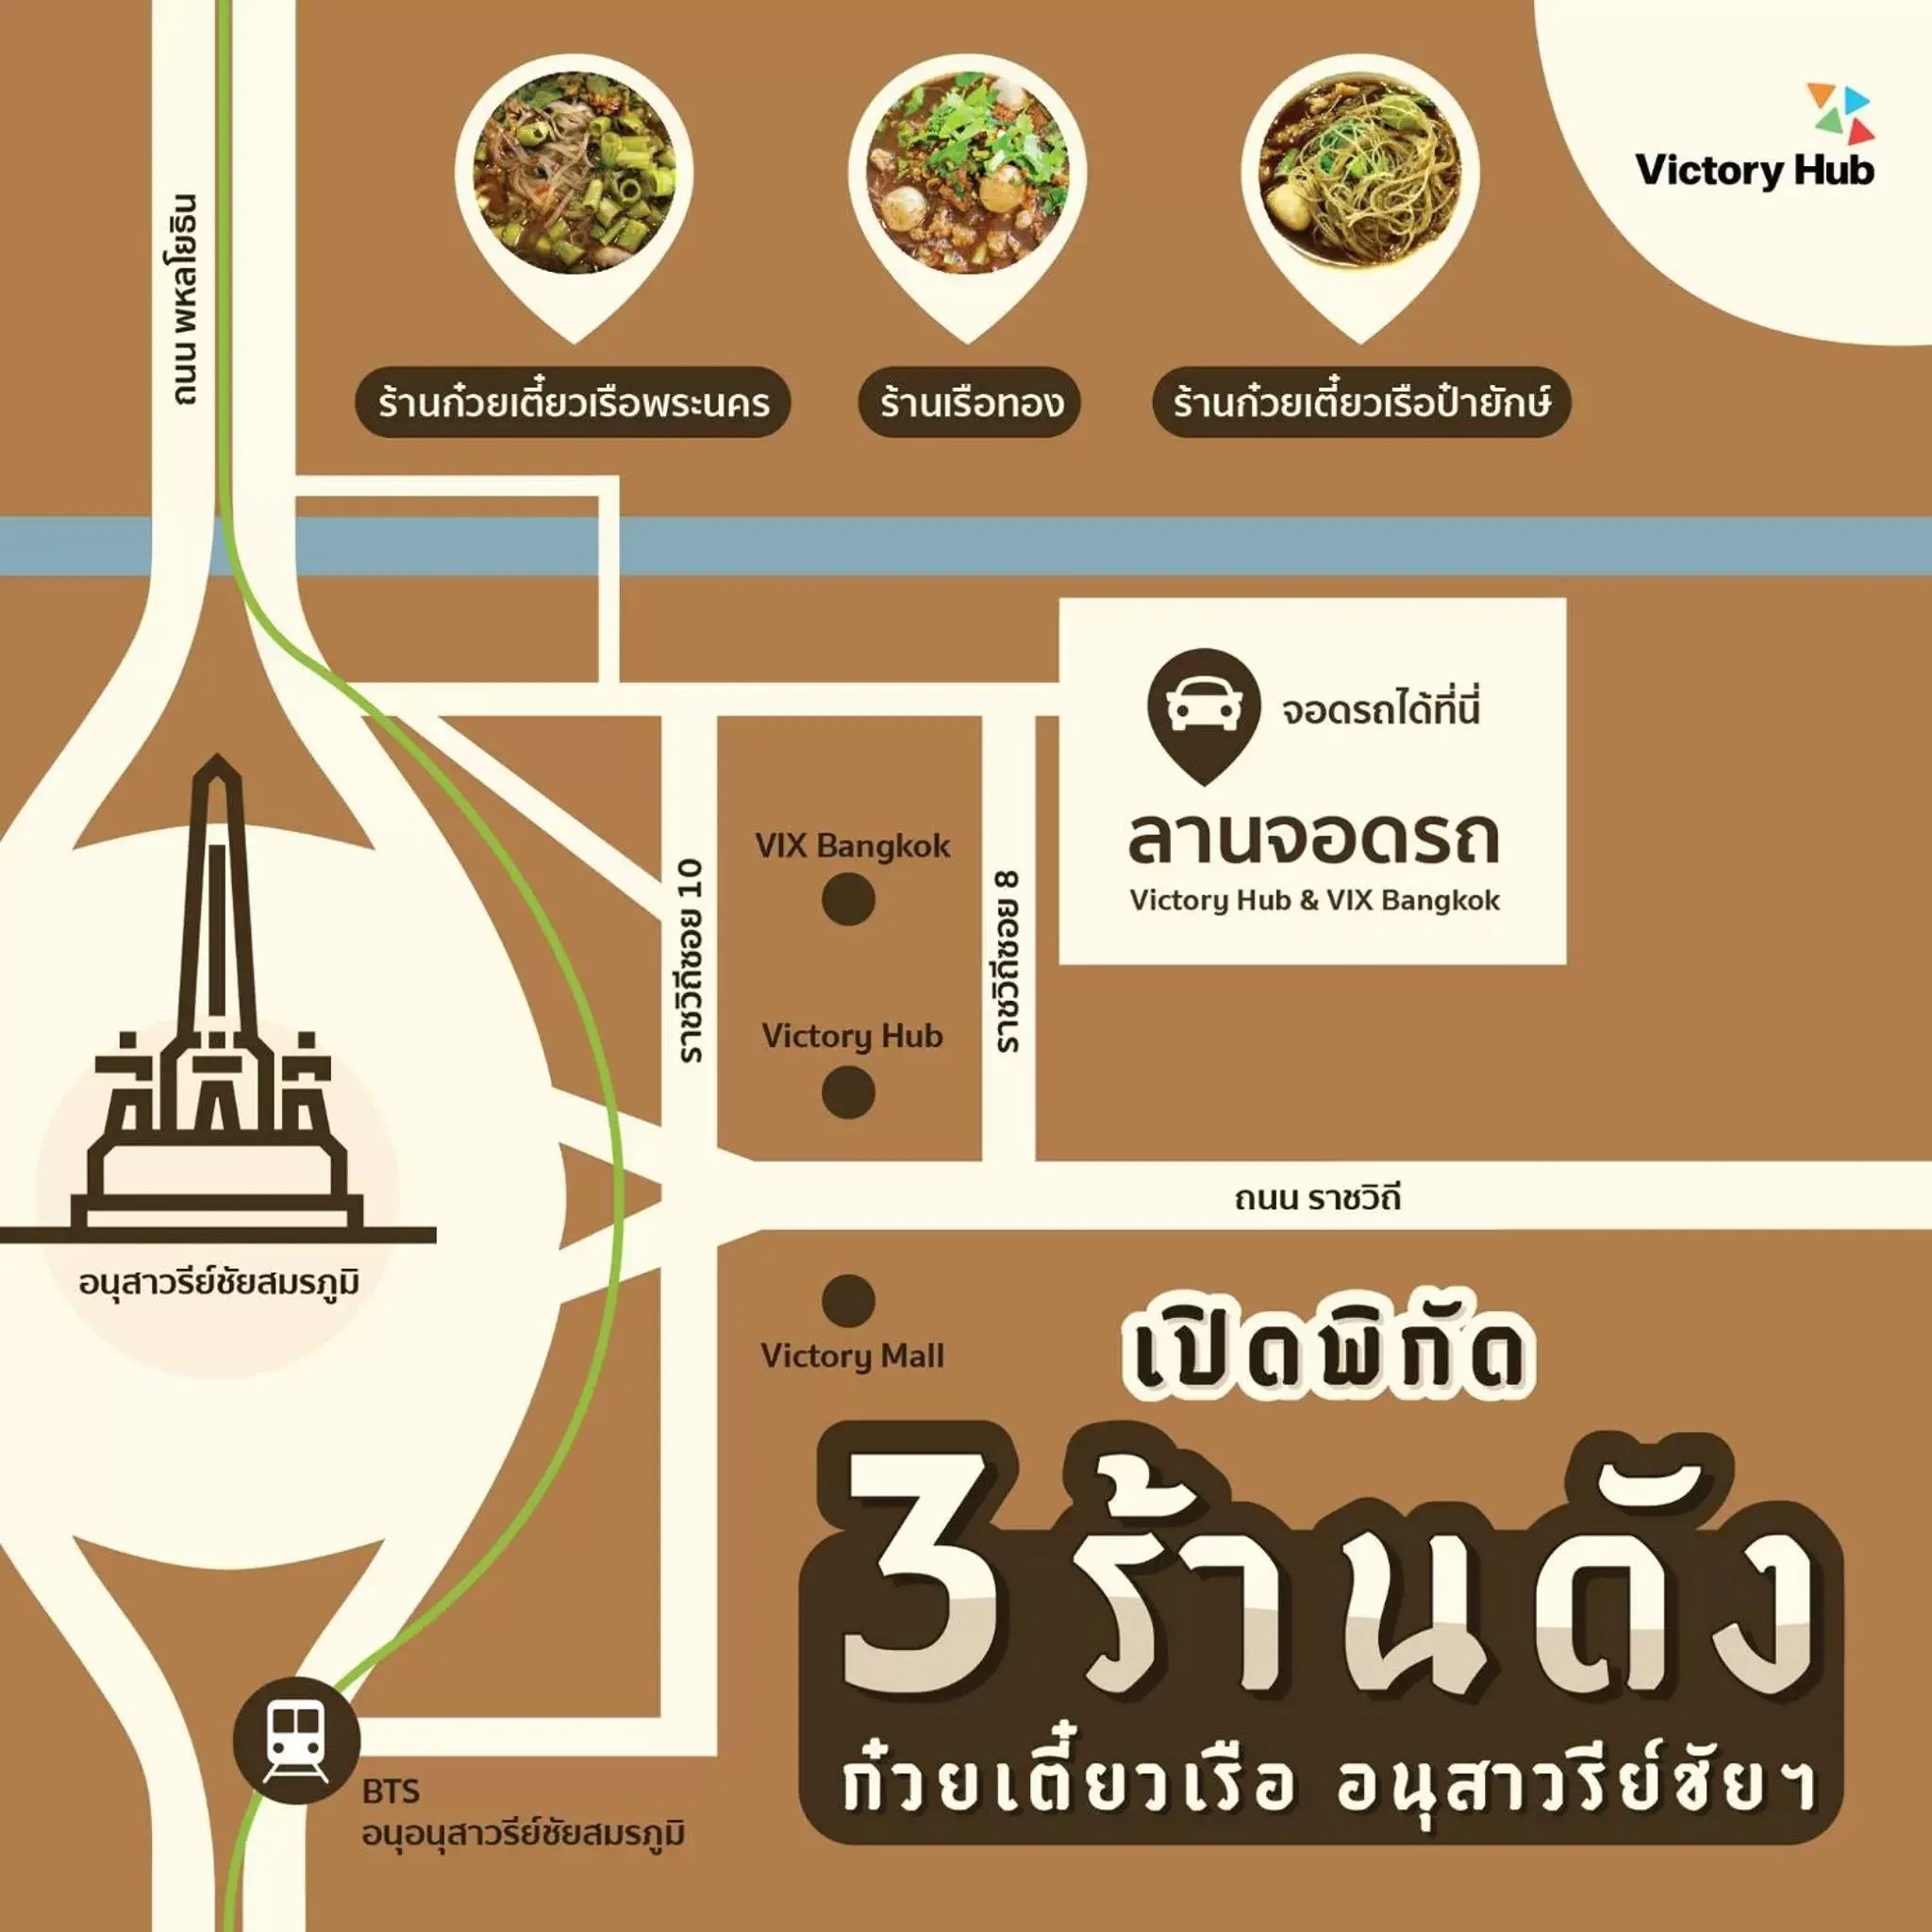 Restaurant/places to eat in VIX Bangkok at Victory Monument